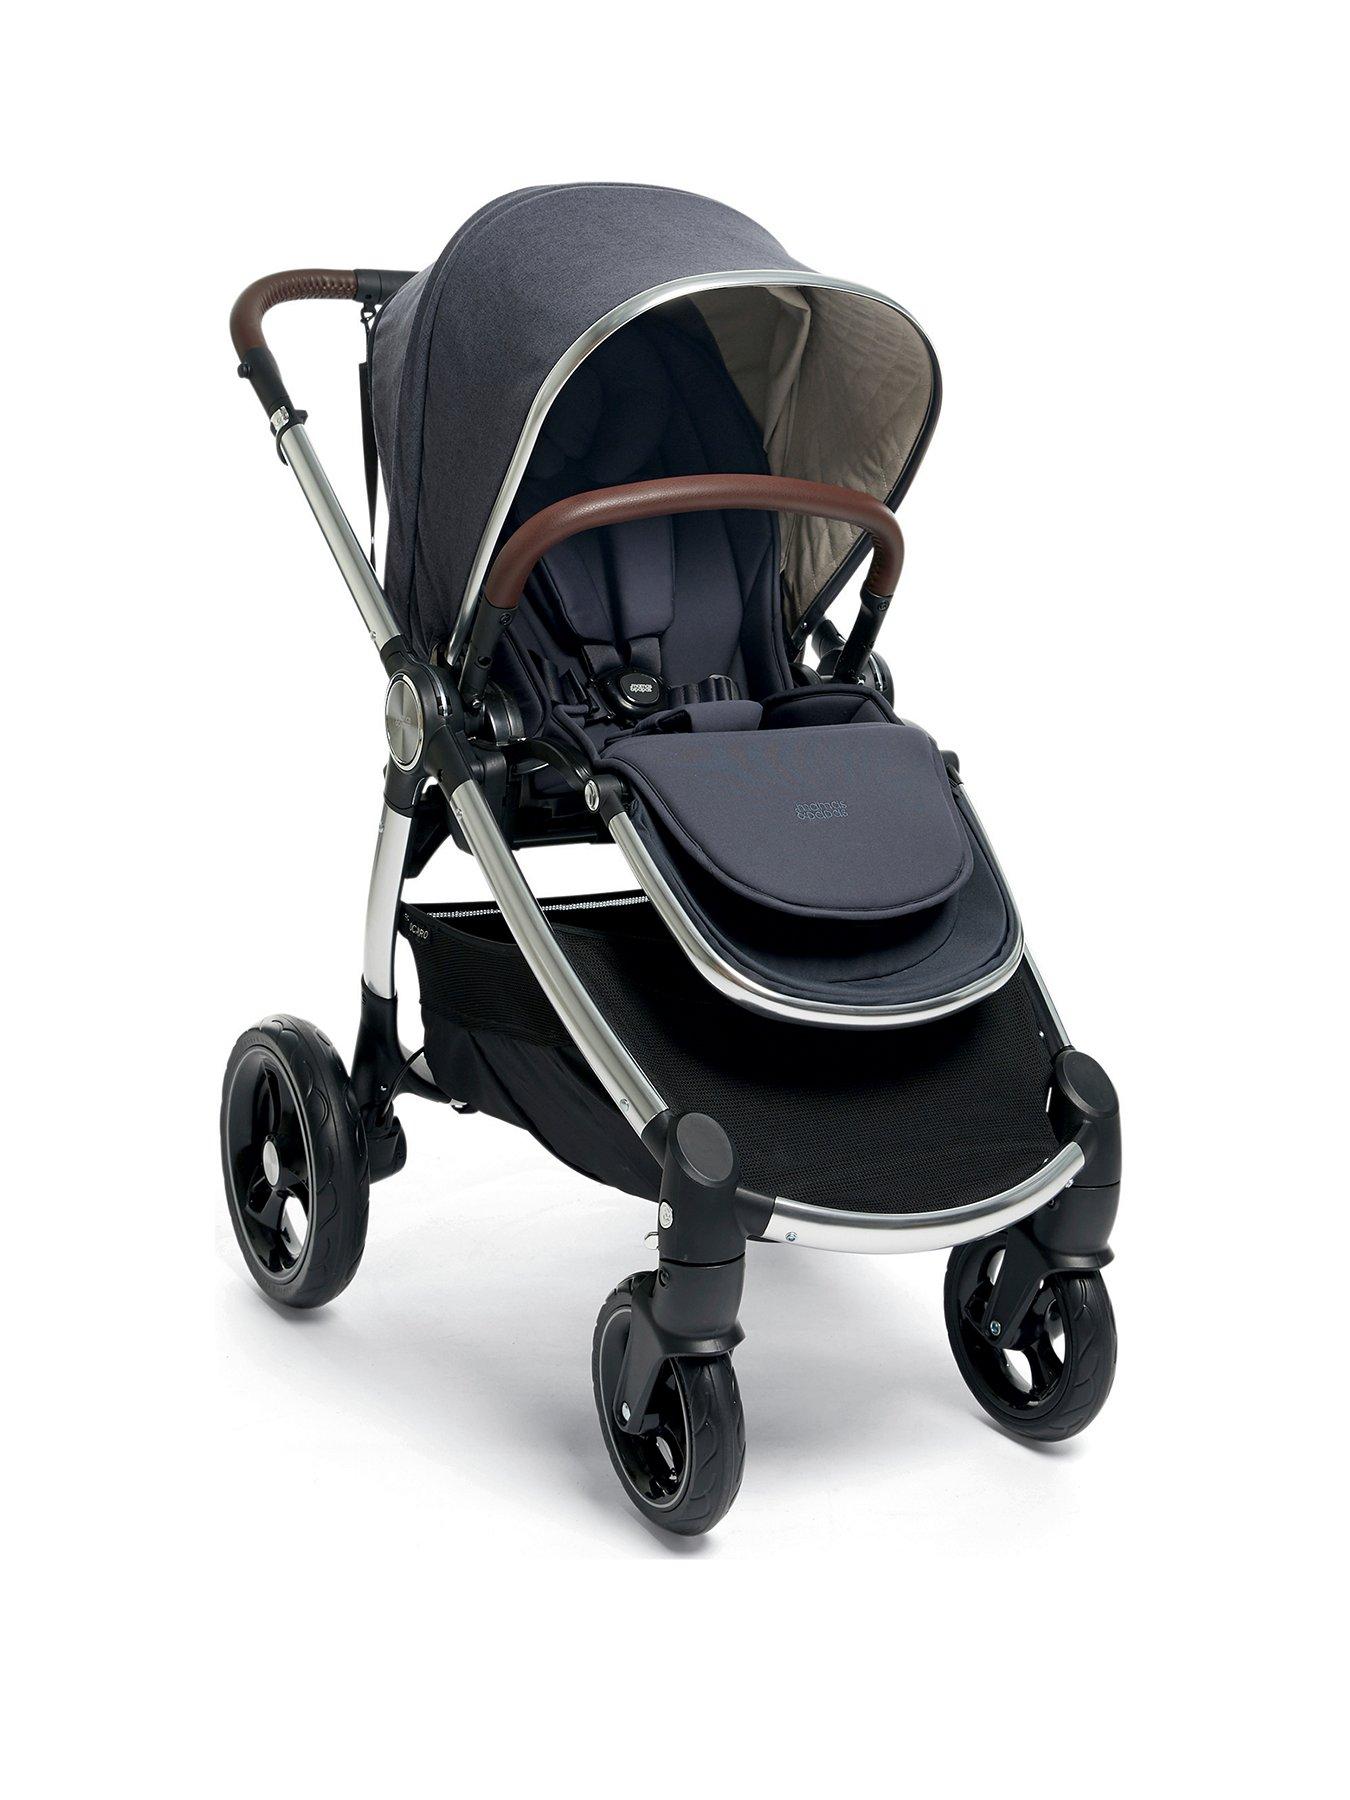 mamas and papas limited edition stroller